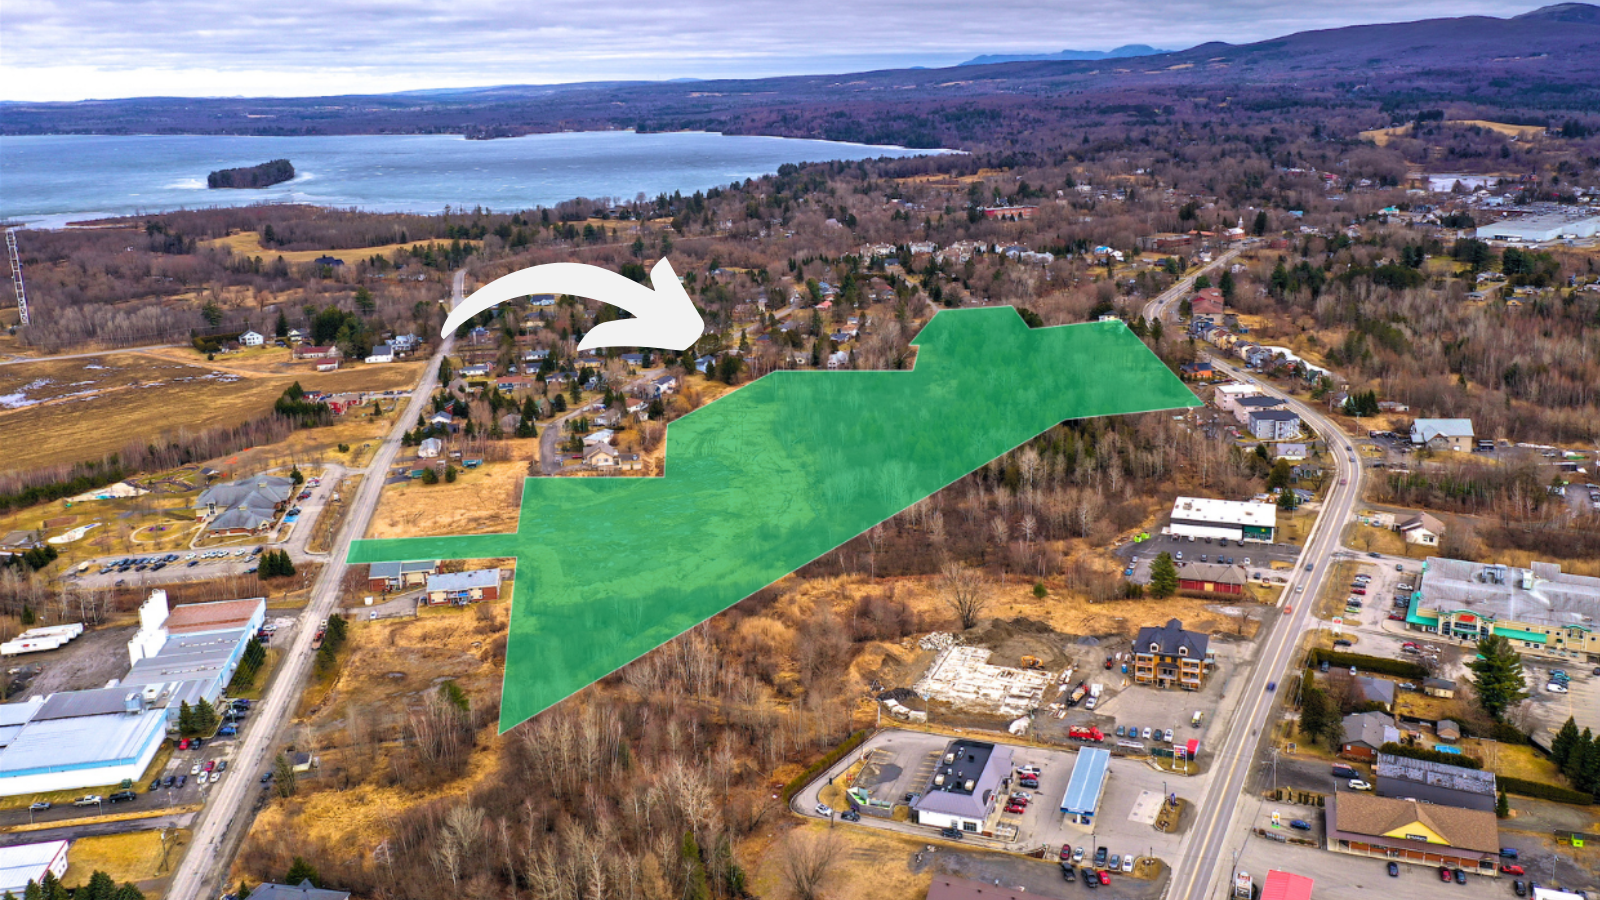 Landerz is an exclusive destination for finding land suitable for commercial real estate development, residential housing development, and land conservation.